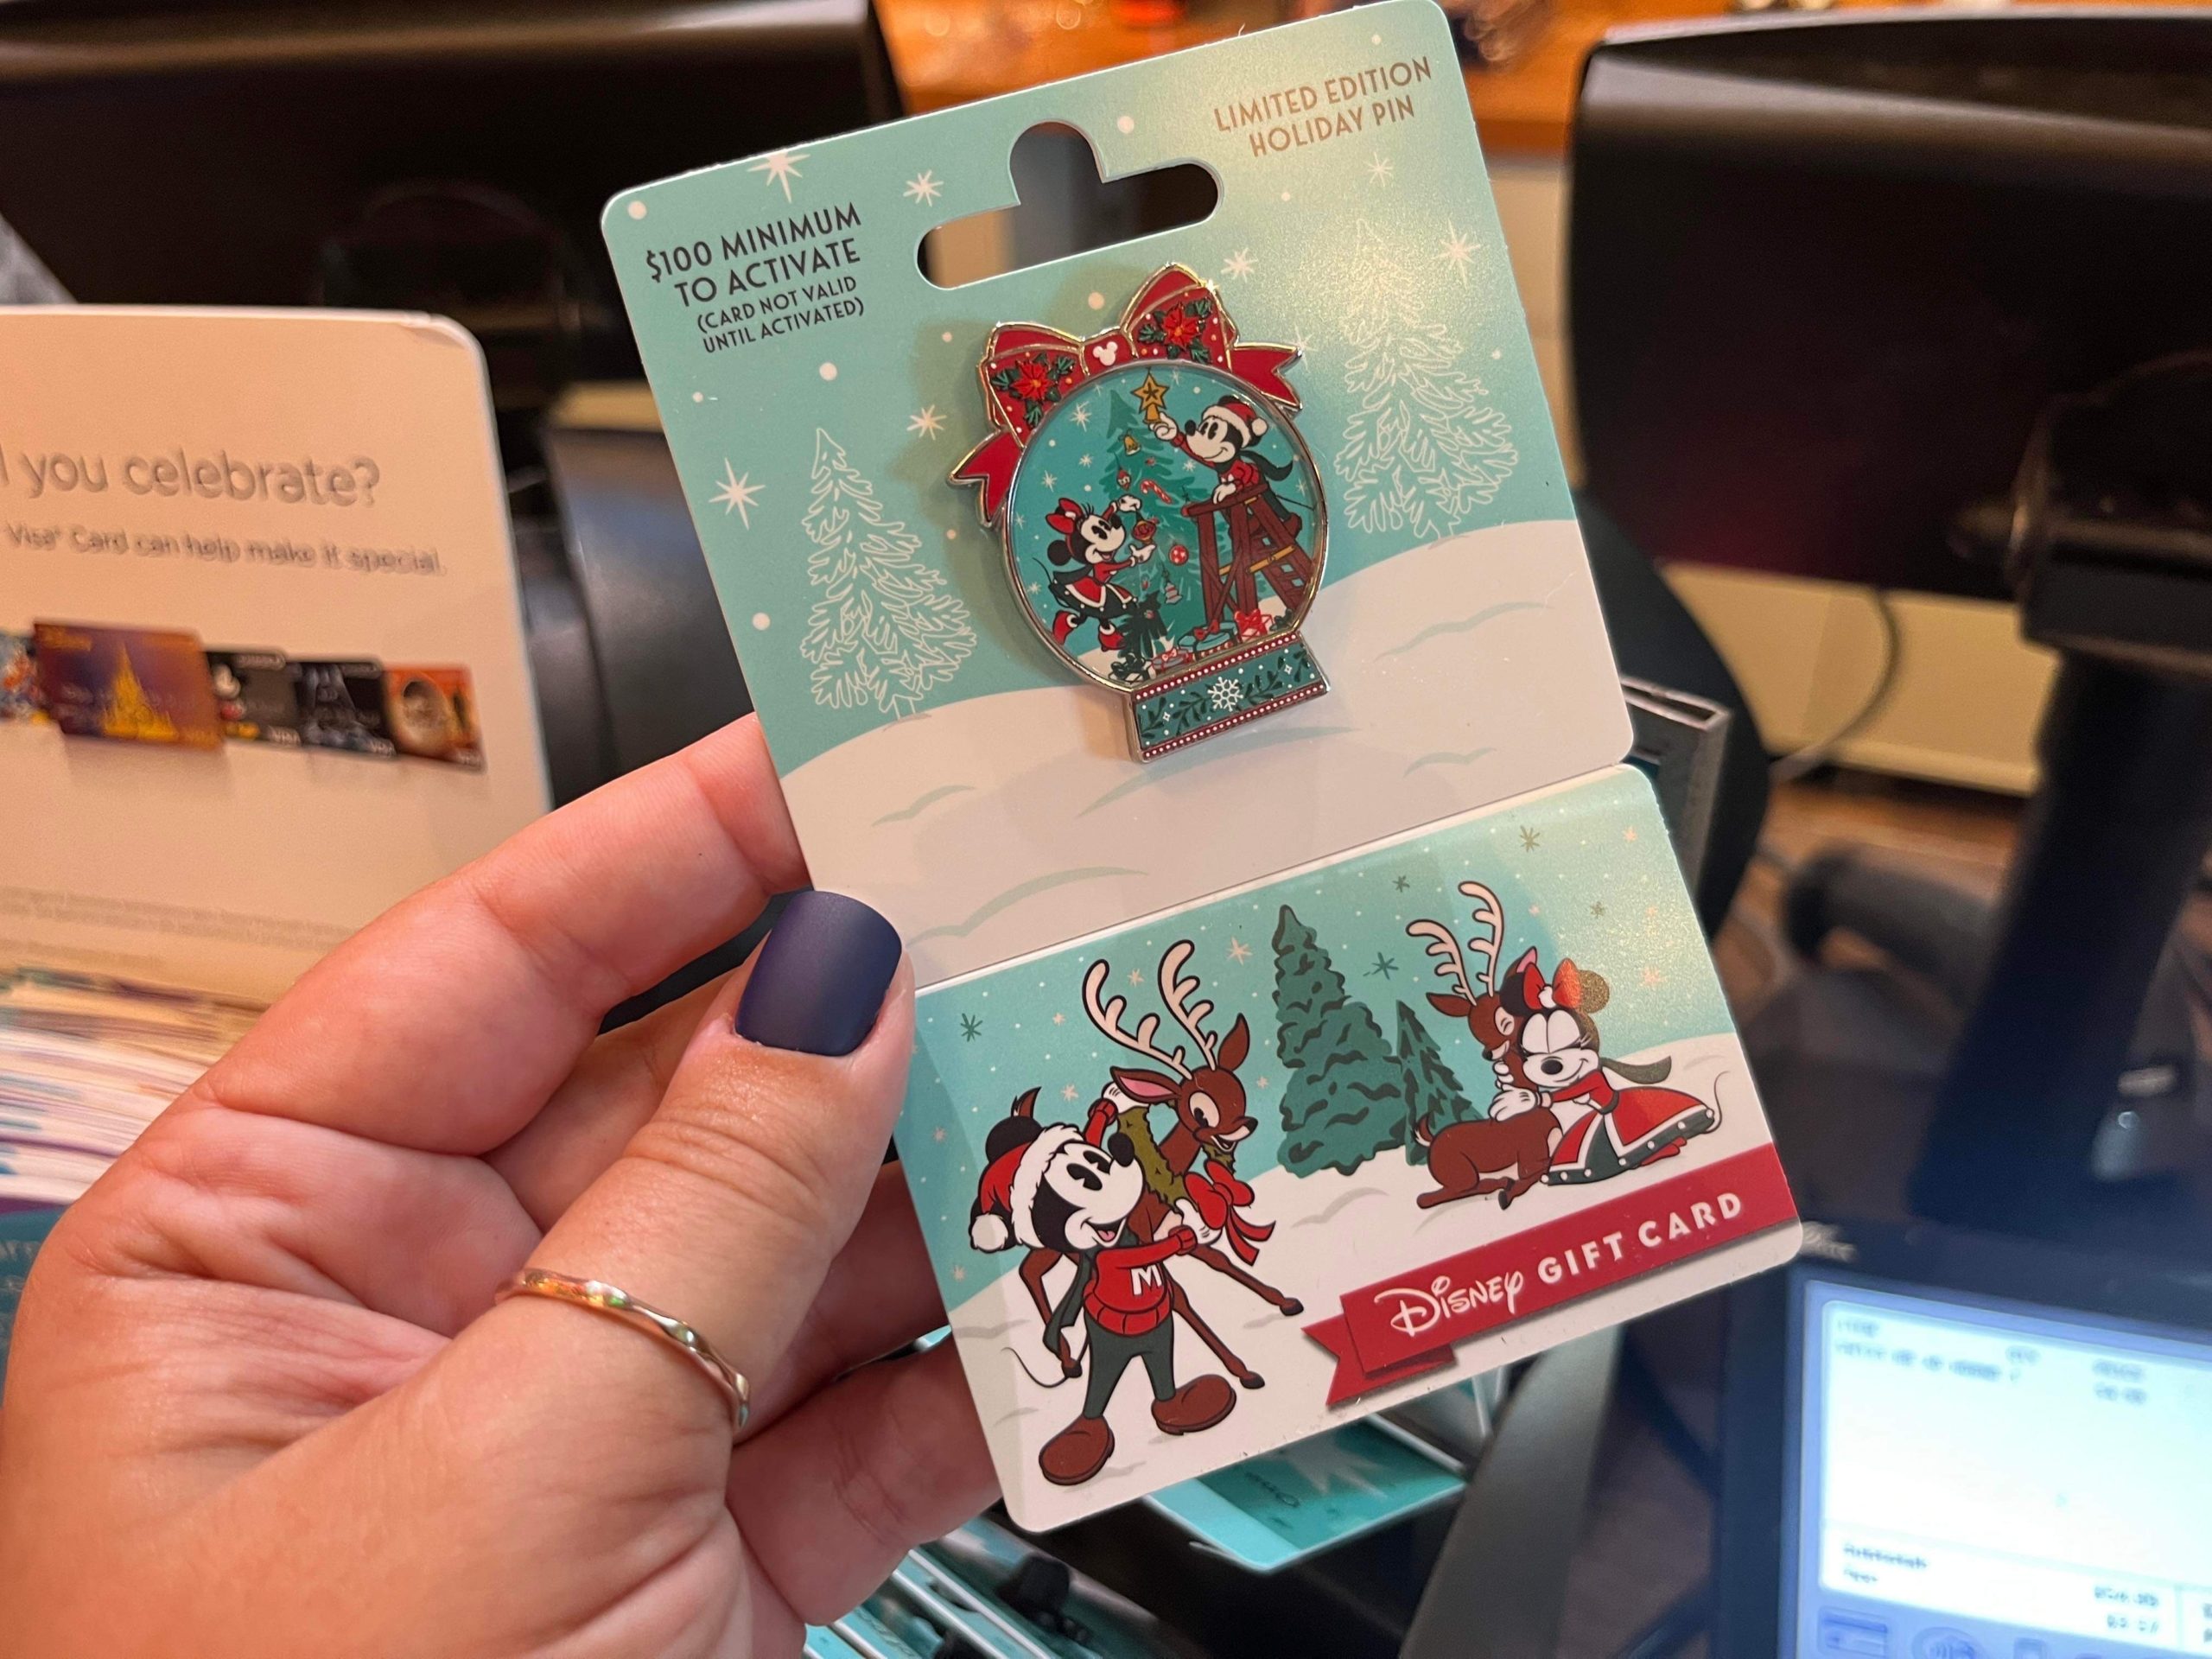 Disney's Christmas Gift Card and Pin Set is the PERFECT Gift